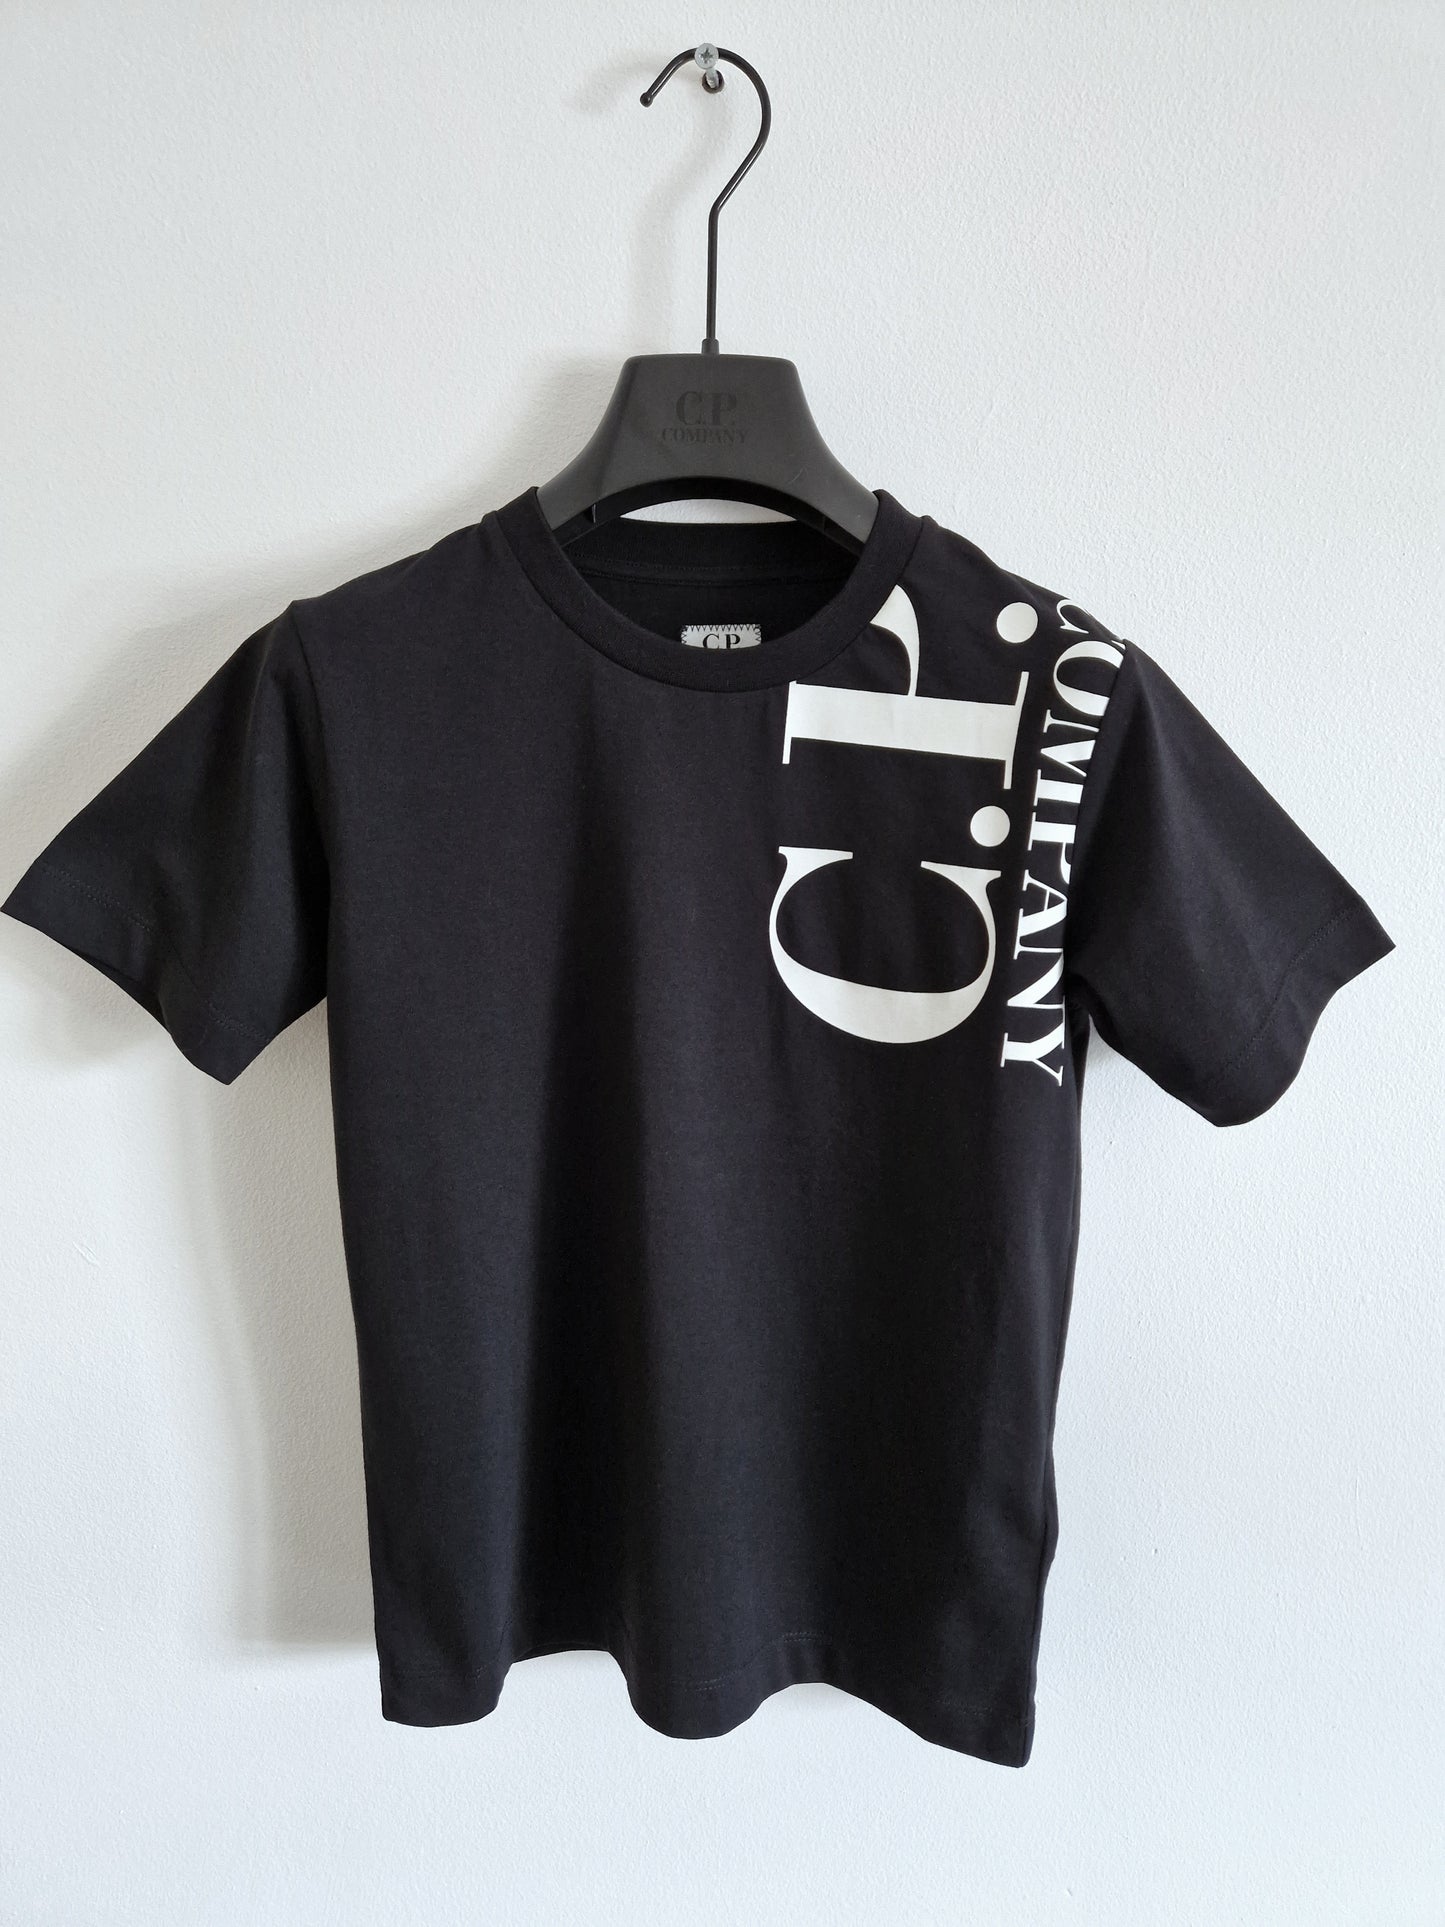 C.P. Company Junior Large Spell Out T-Shirt - Black